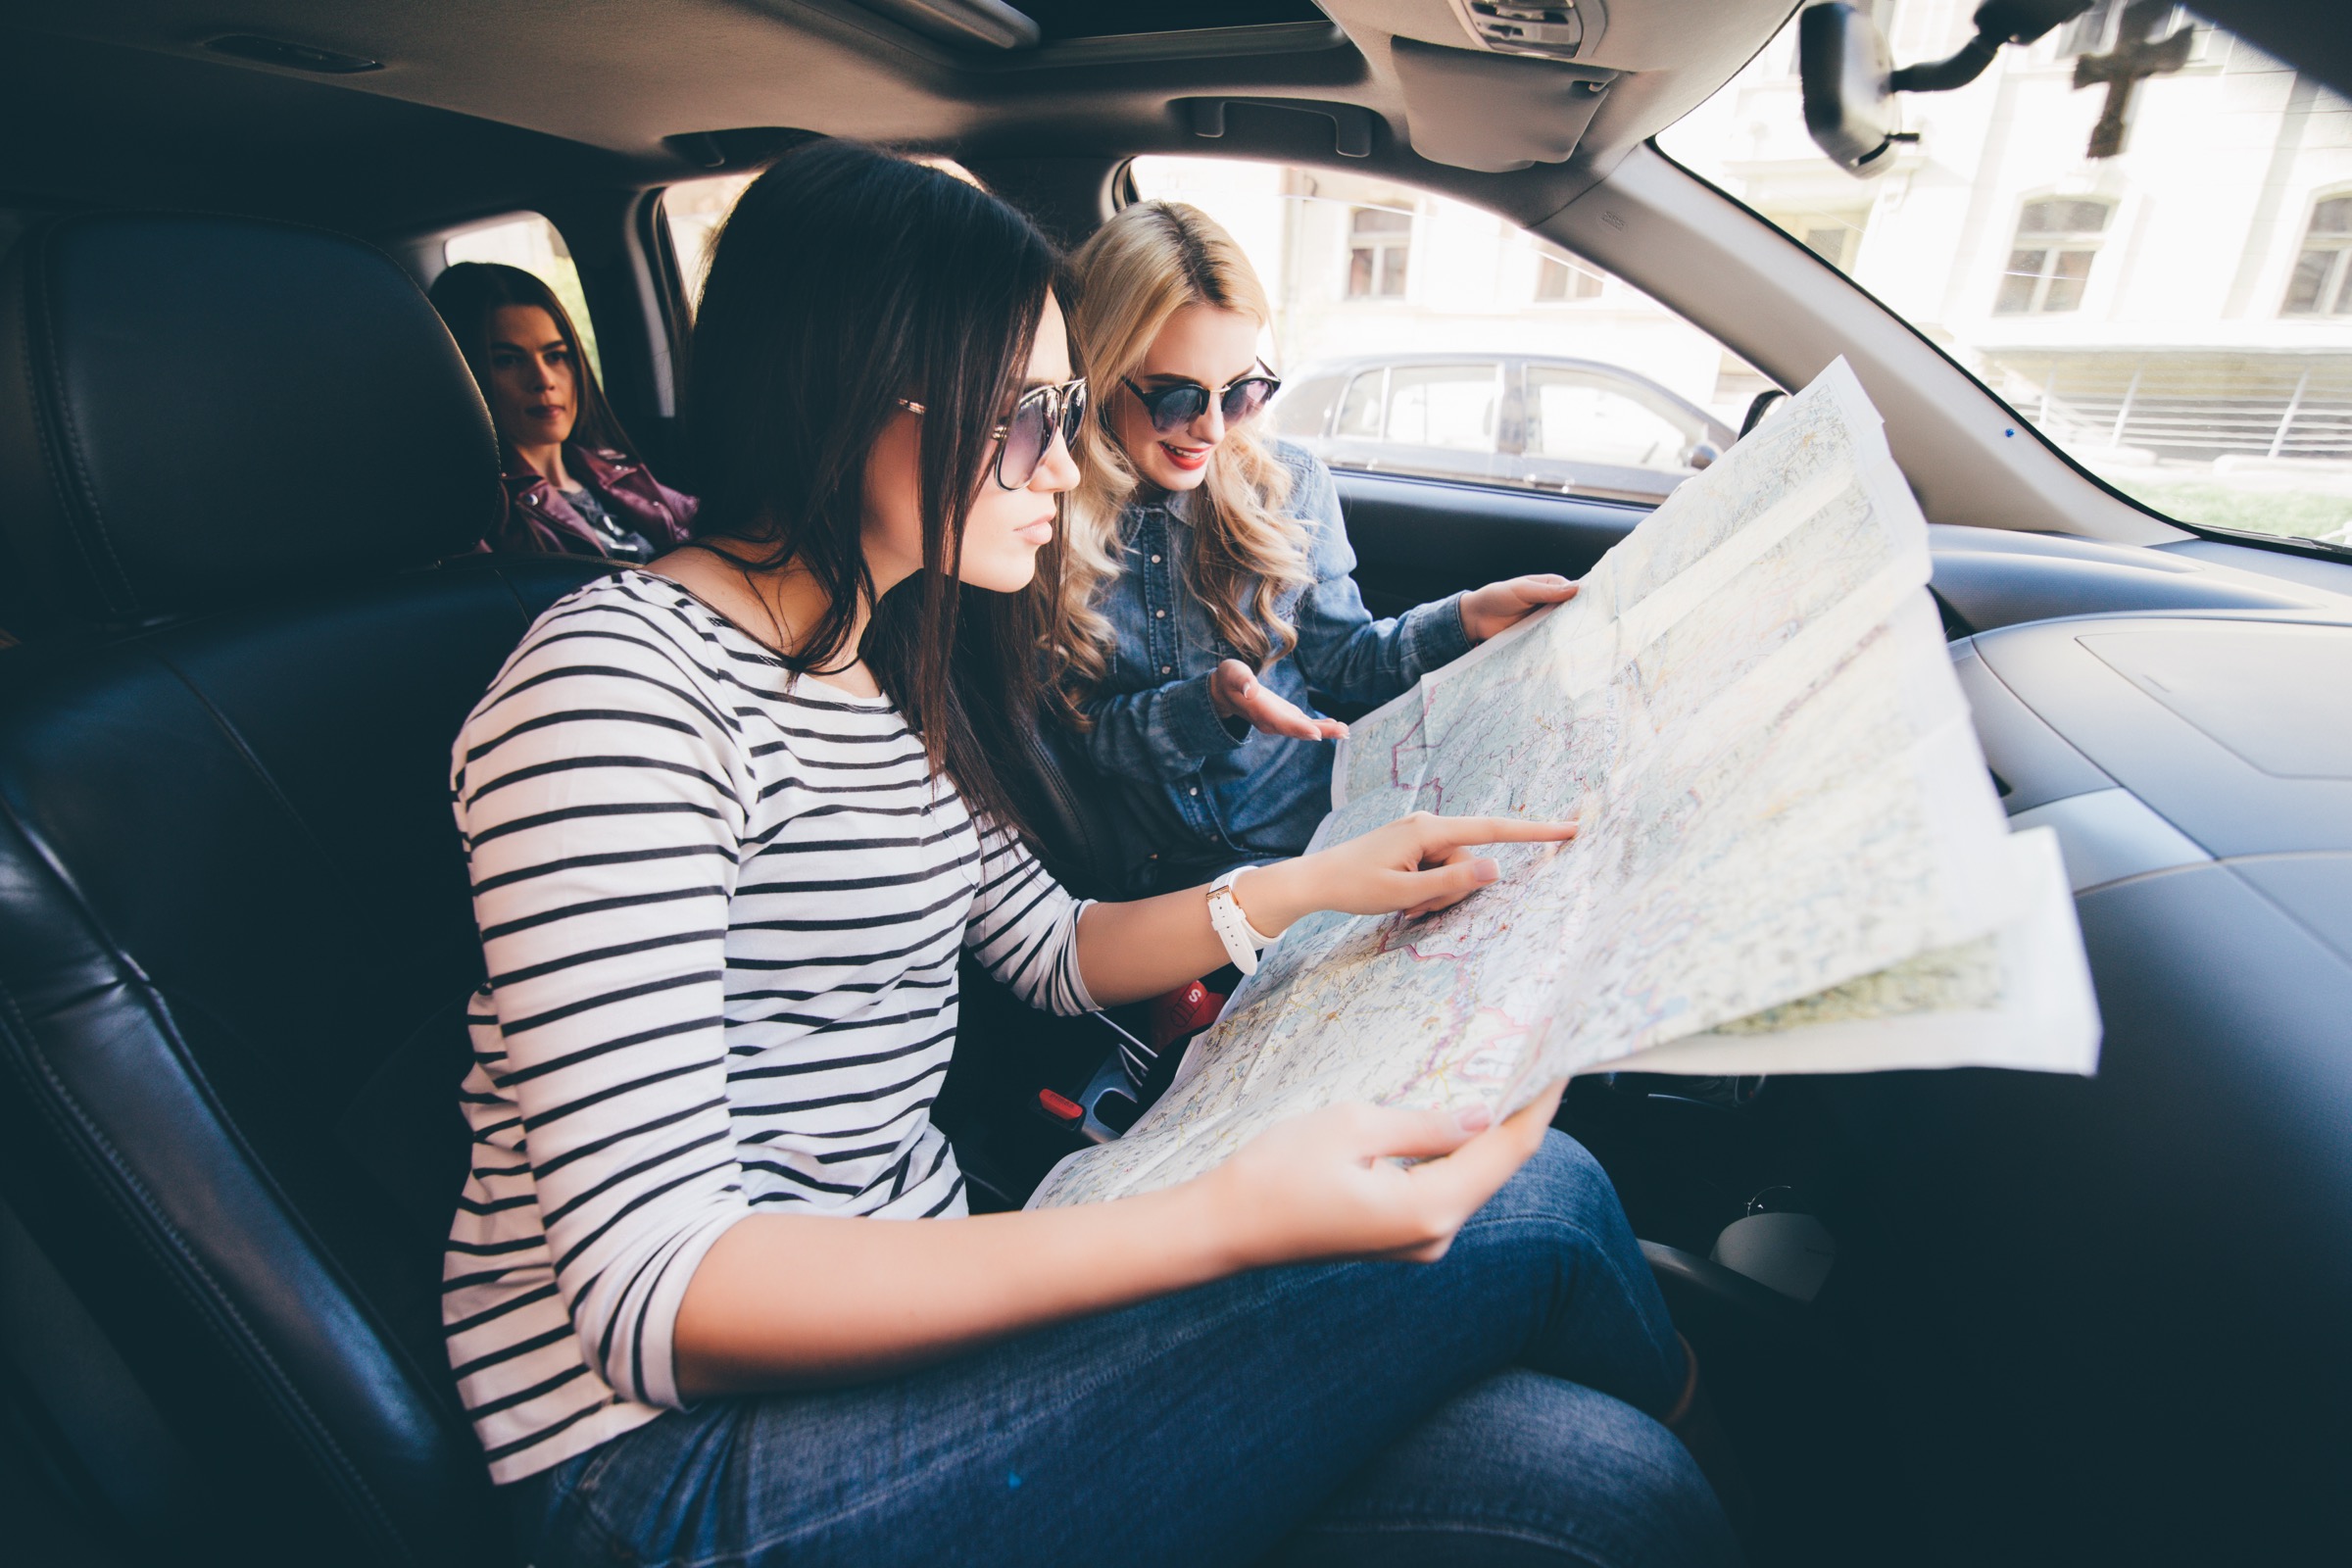 A woman drives a car while the woman next to her navigates on a map